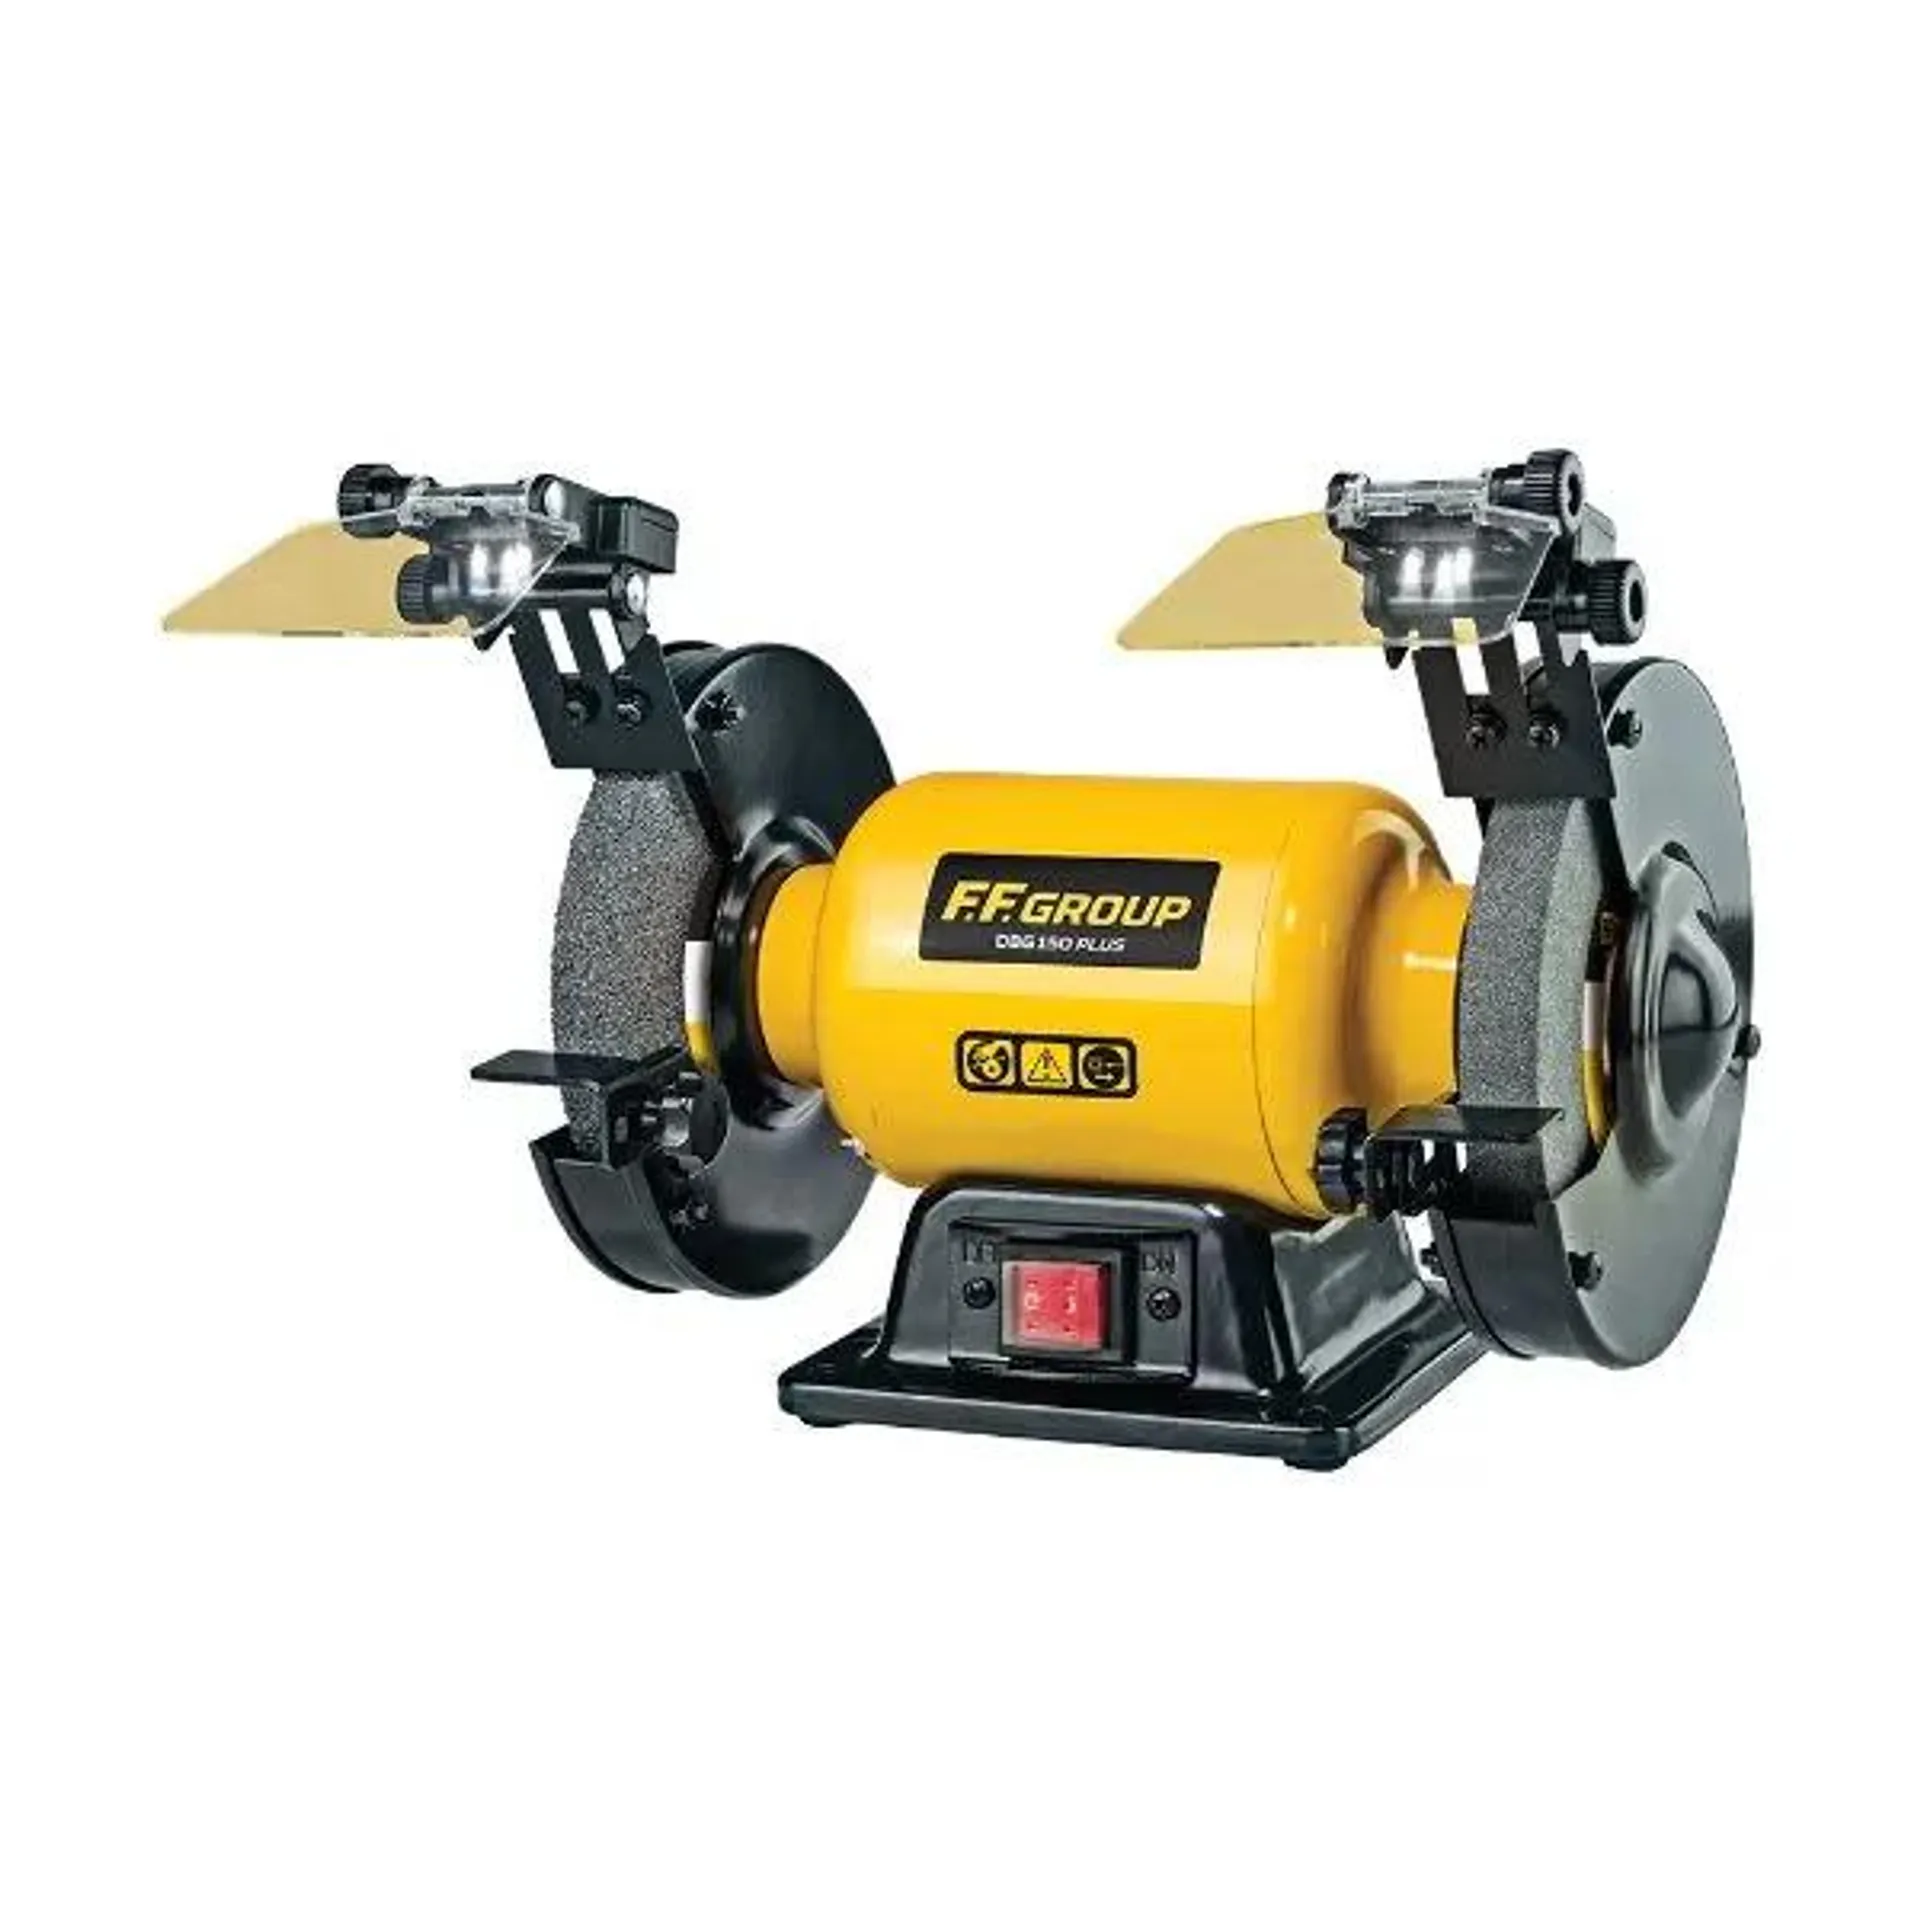 DOUBLE WHEELED BENCH GRINDER DBG 150 PLUS 400W FF GROUP